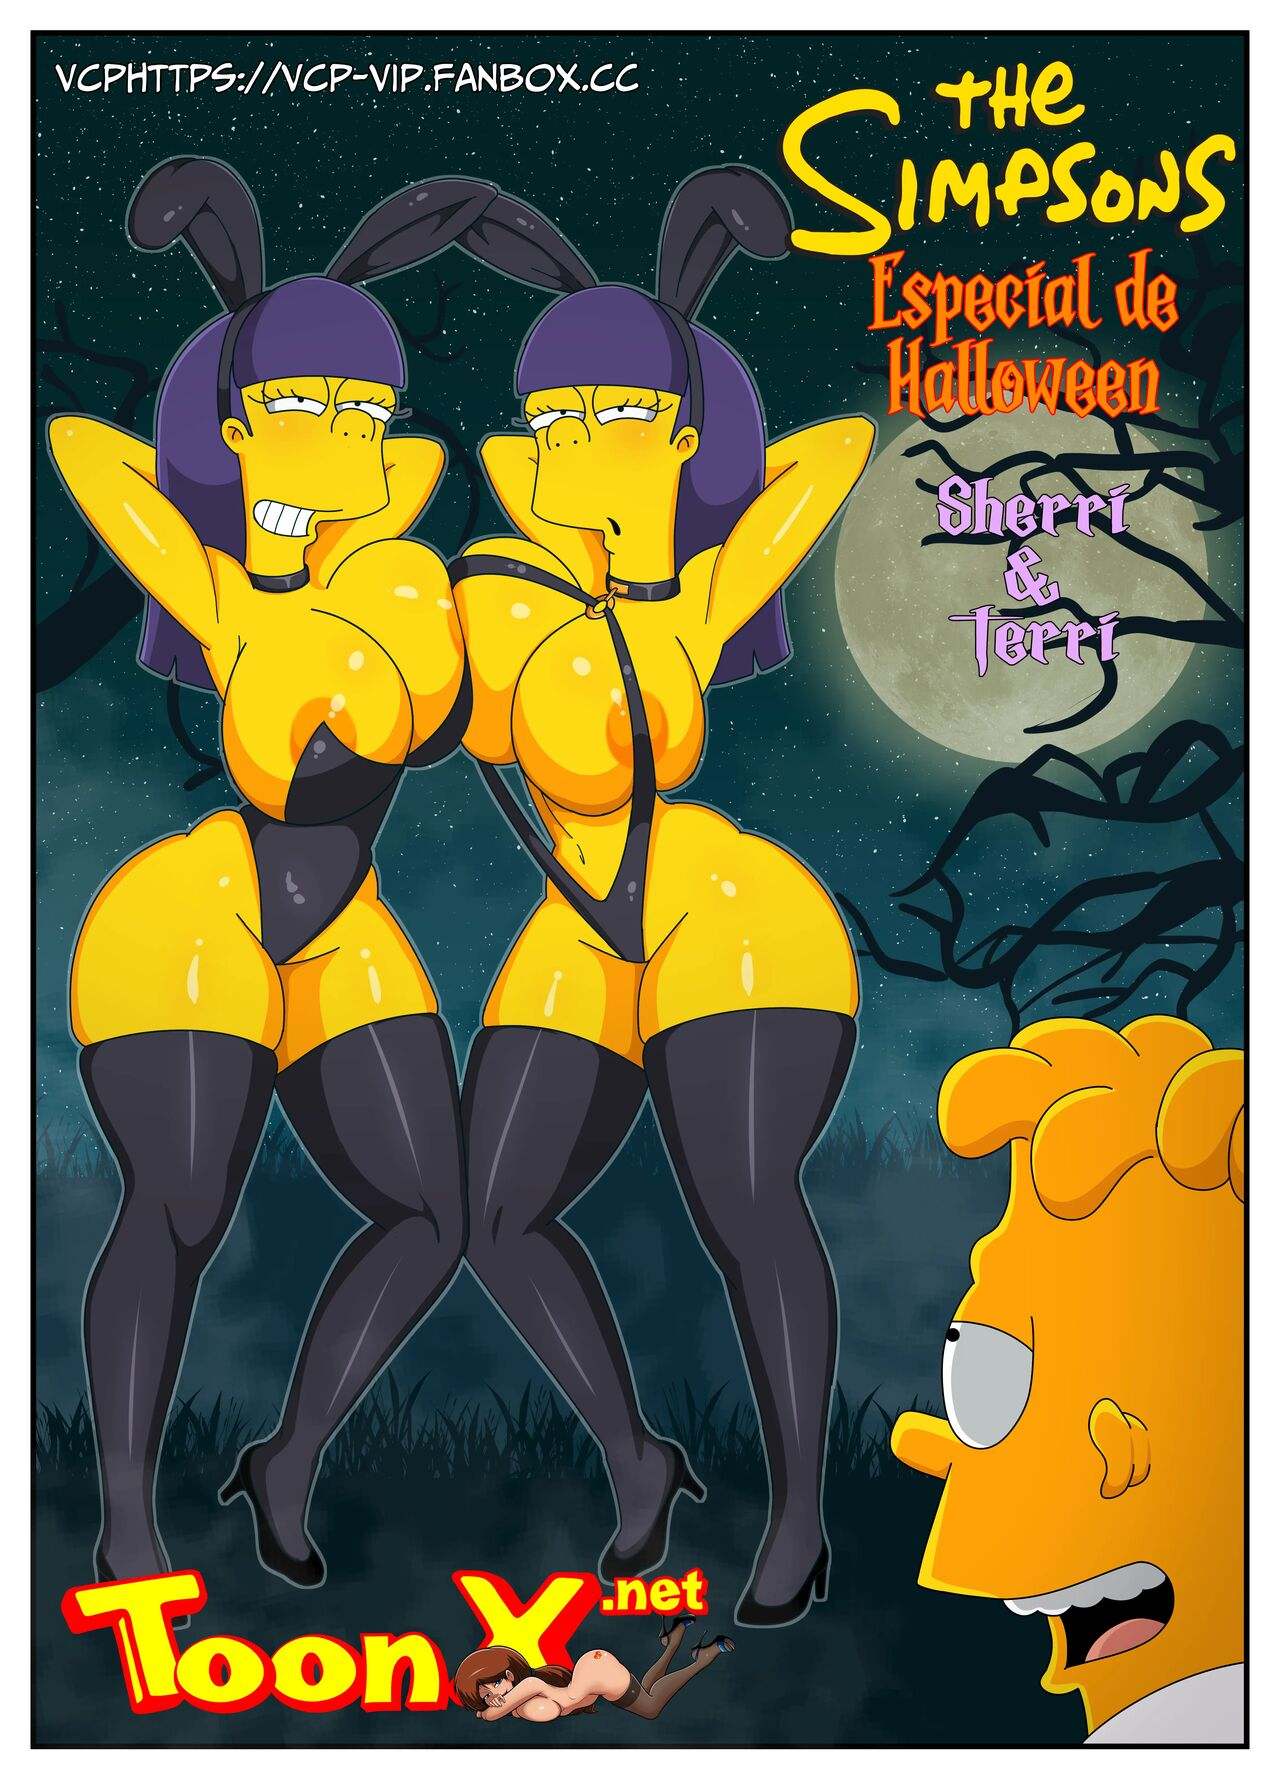 The Yellow Fantasy 5: Halloween Special Sherry & Terry – ToonX - Comics Army